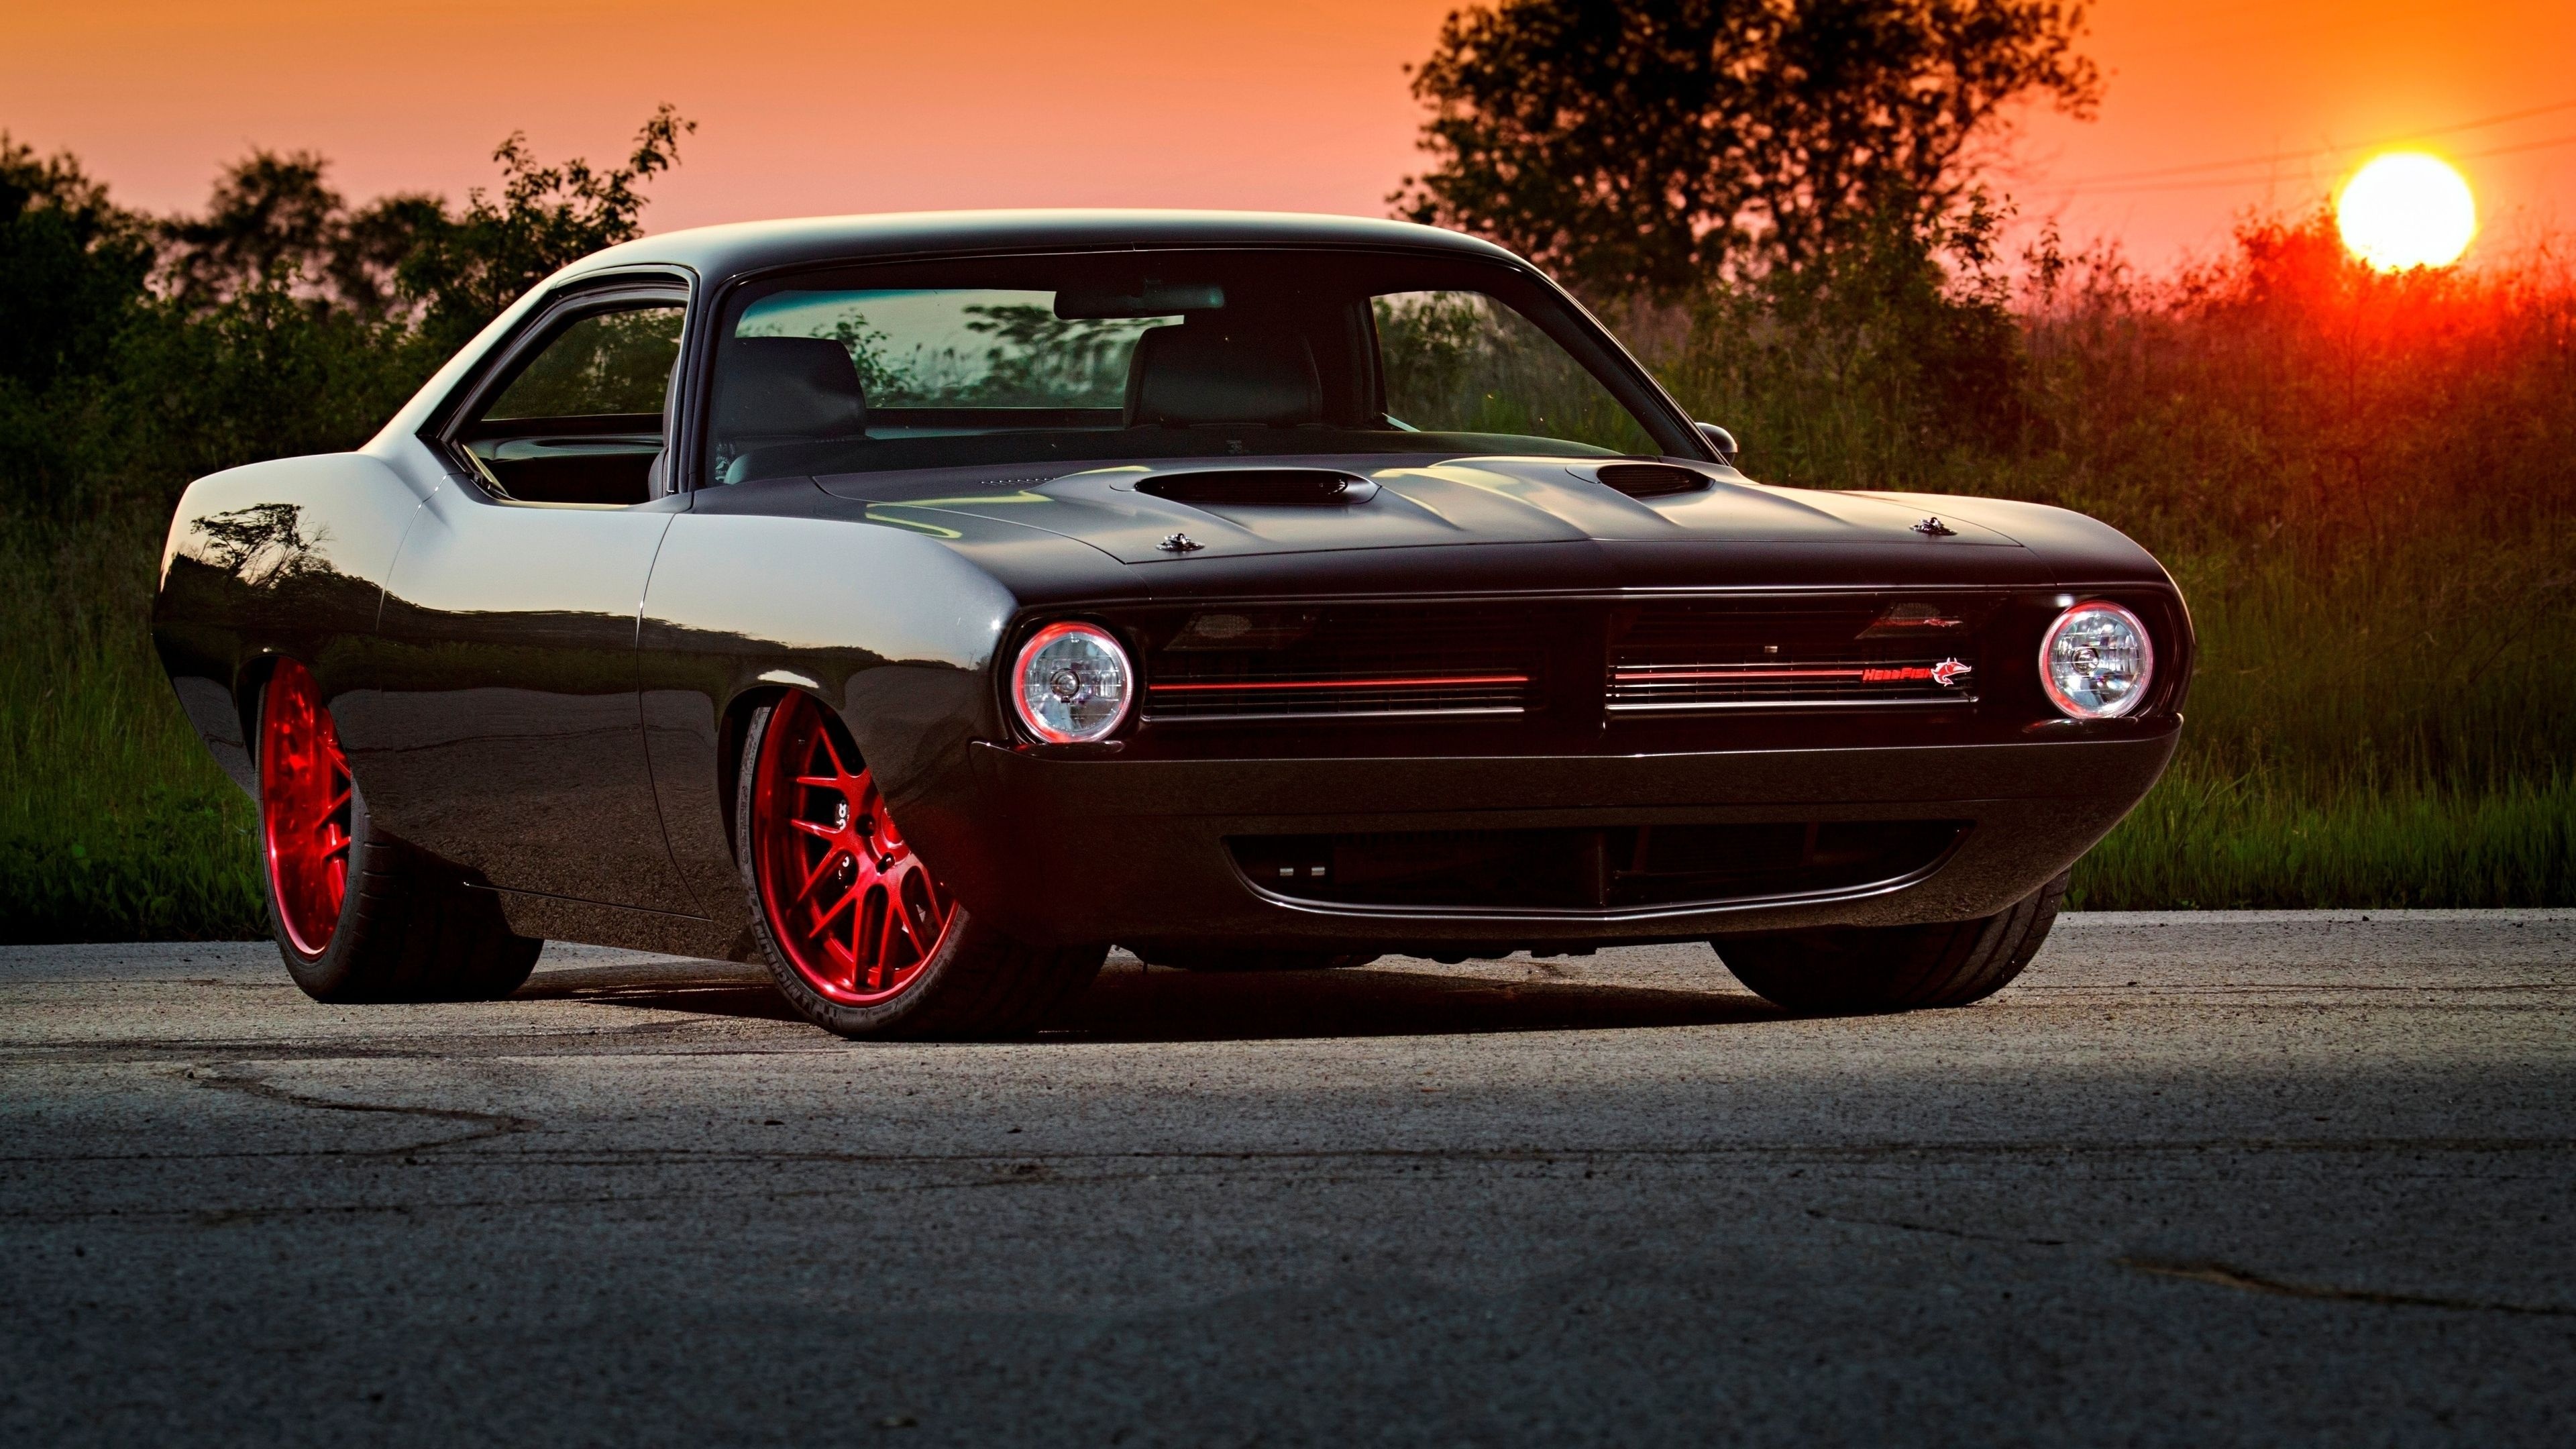 Plymouth Barracuda Wallpapers, Top Free Backgrounds, 3840x2160 4K Desktop